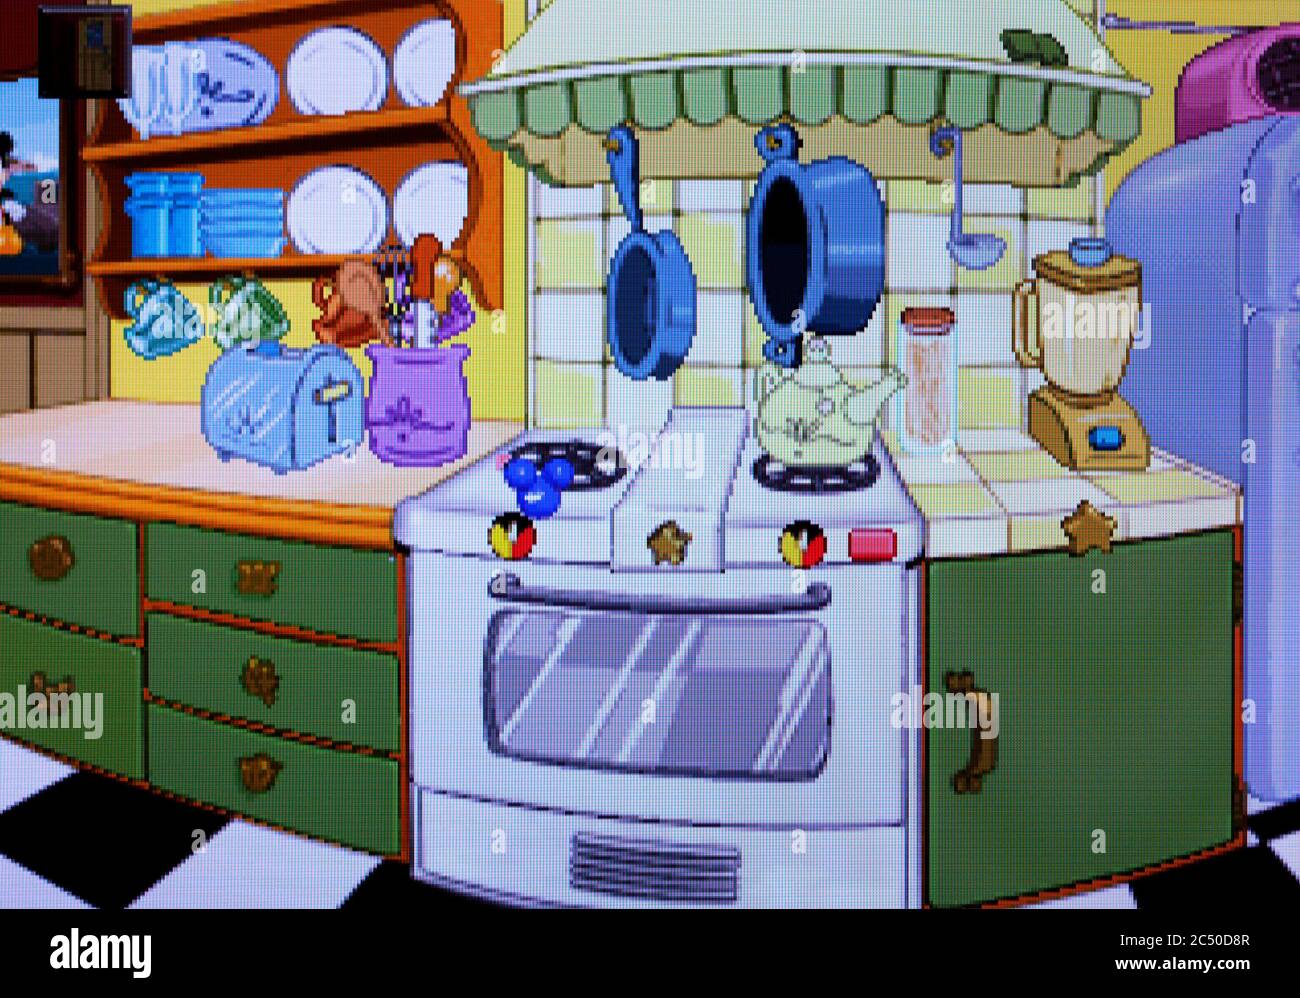 https://c8.alamy.com/comp/2C50D8R/my-disney-kitchen-sony-playstation-1-ps1-psx-editorial-use-only-2C50D8R.jpg